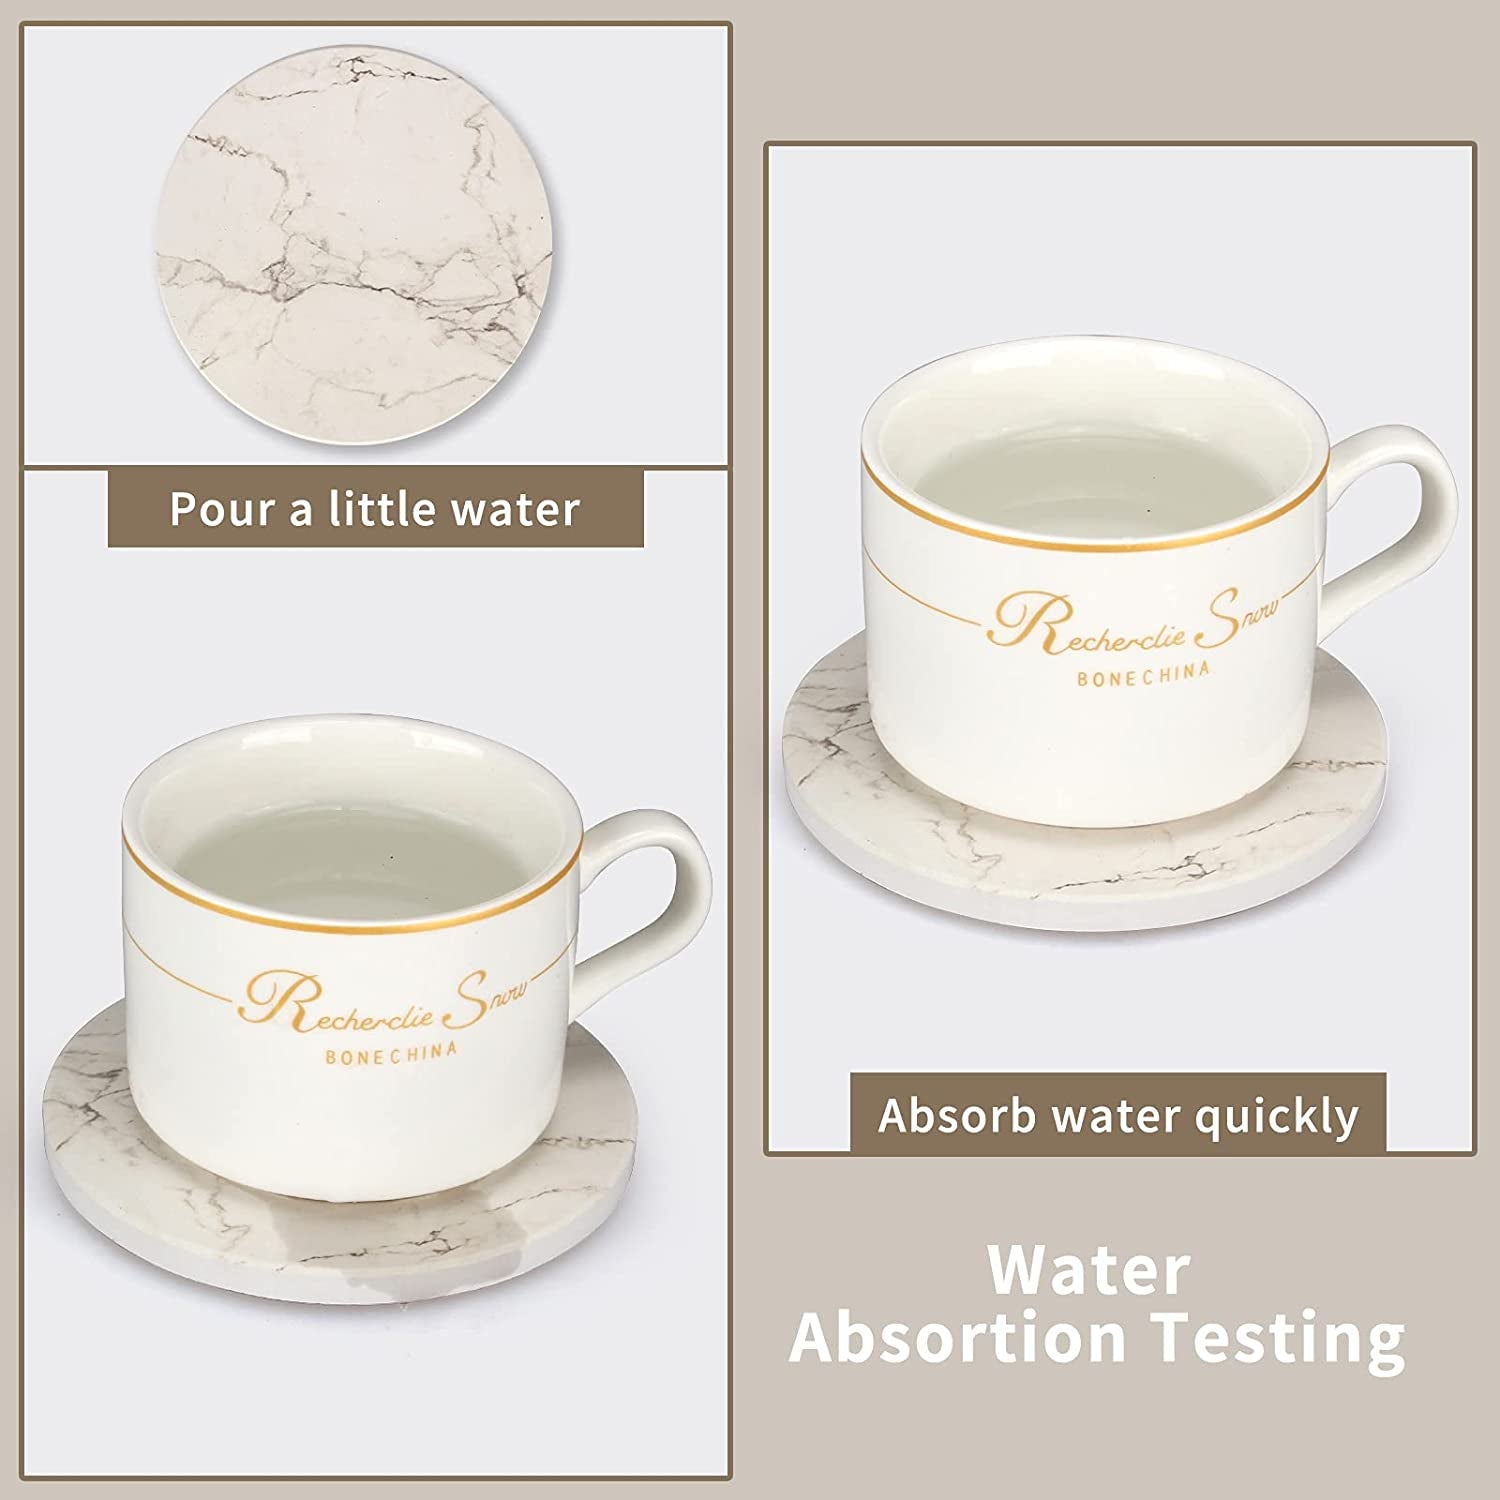 6 Pcs White Marble Coaster Set with Holder Best Absorbent Coasters Drink Coasters Ceramic Bar Wine Coasters Cute Stone Thirstysone Table Cup Coasters